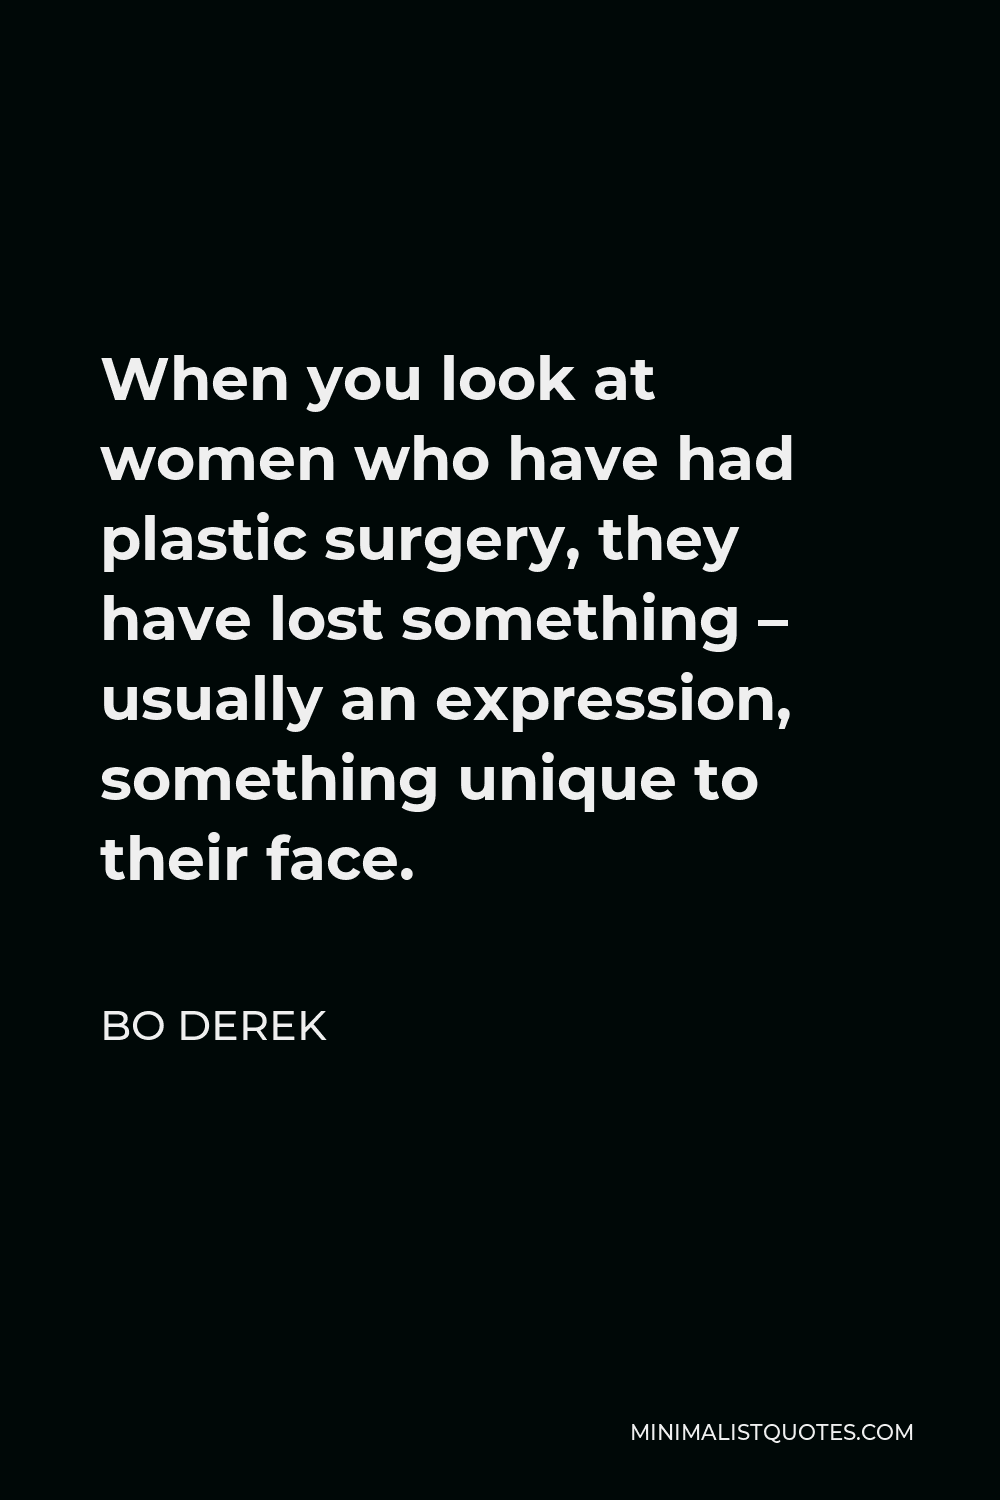 Bo Derek Quote - When you look at women who have had plastic surgery, they have lost something – usually an expression, something unique to their face.